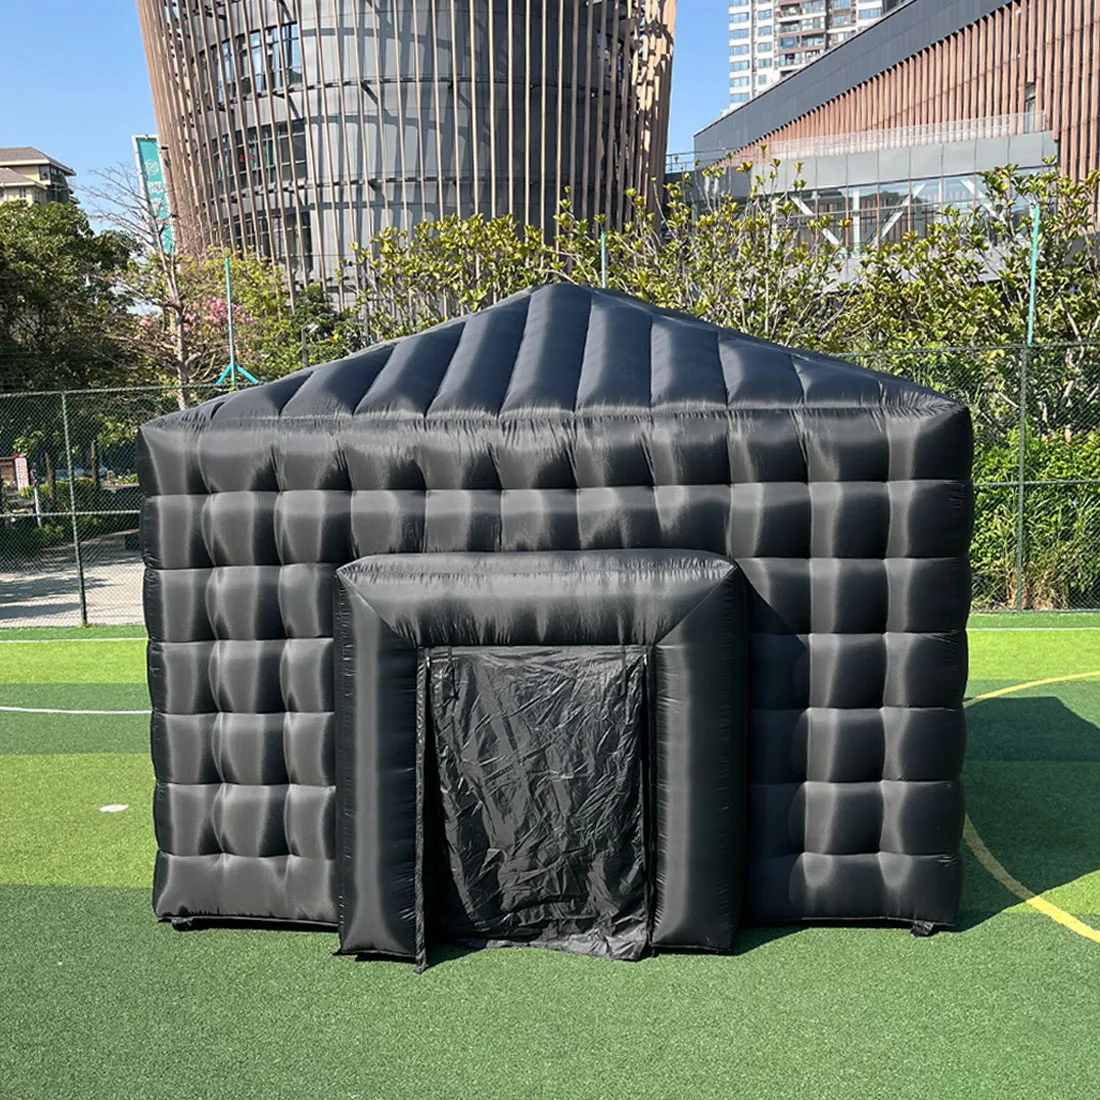 Portable Black Cube Tent Inflatable Disco Night Club Tent Cube Wedding Tent House Event Room Big Mobile Night Club Party